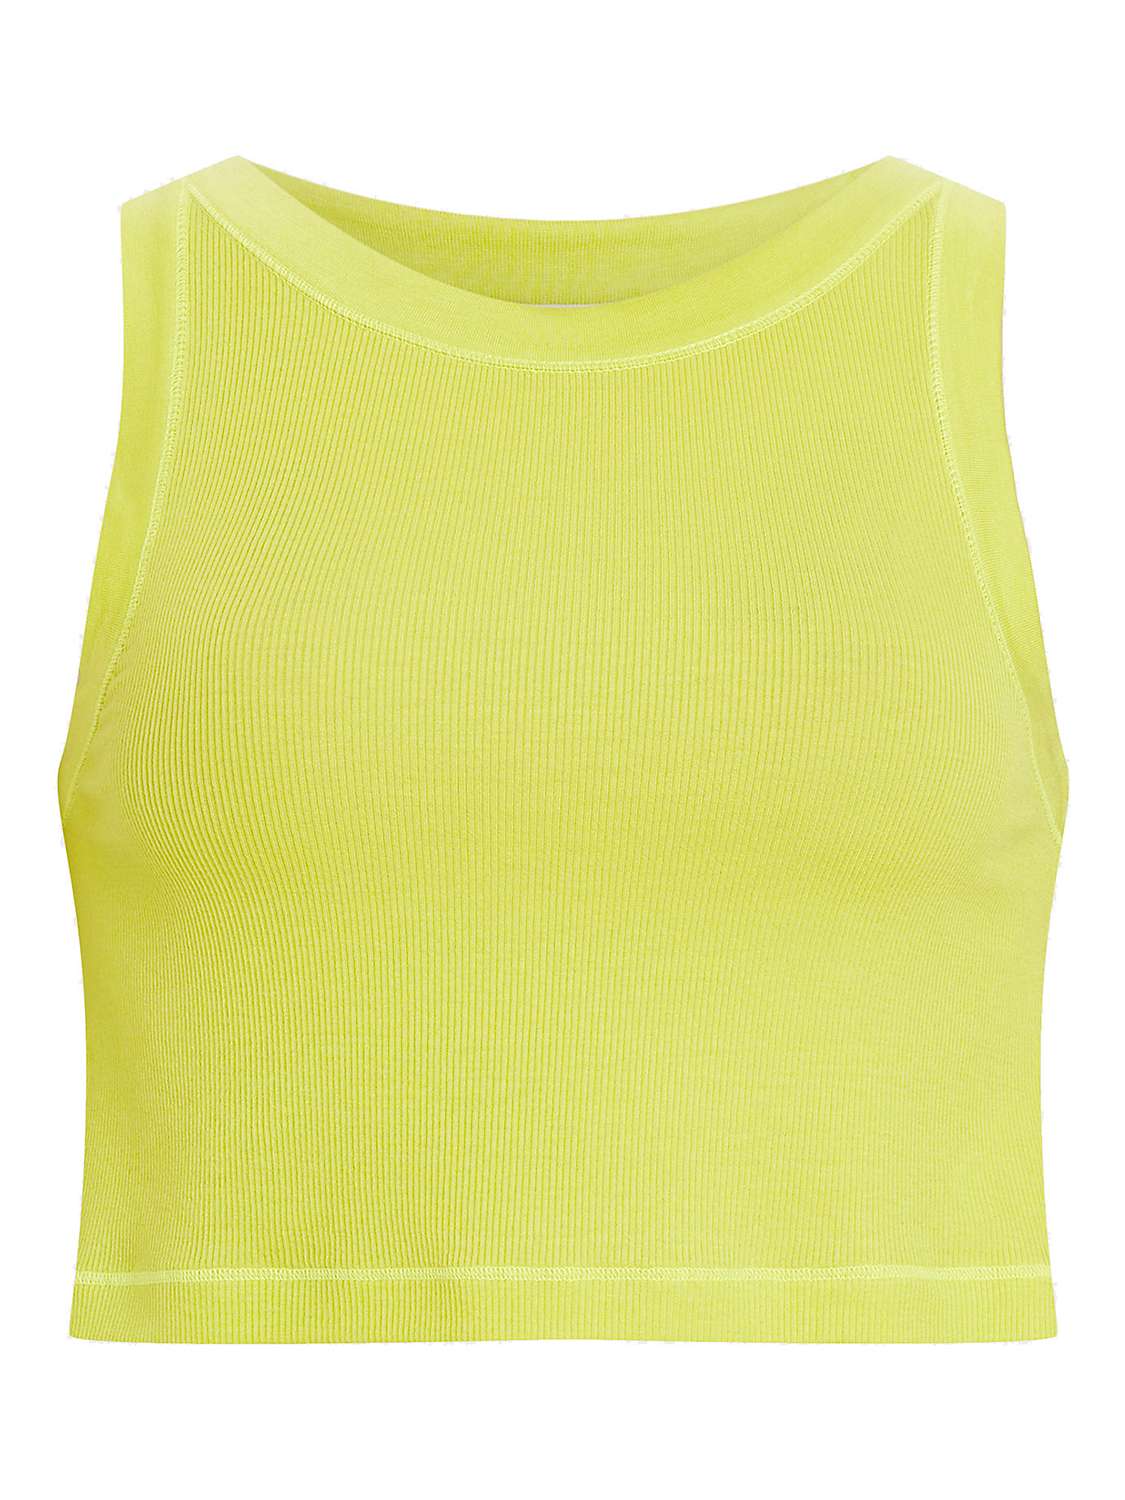 Buy AllSaints Rina Cropped Tank Top Online at johnlewis.com